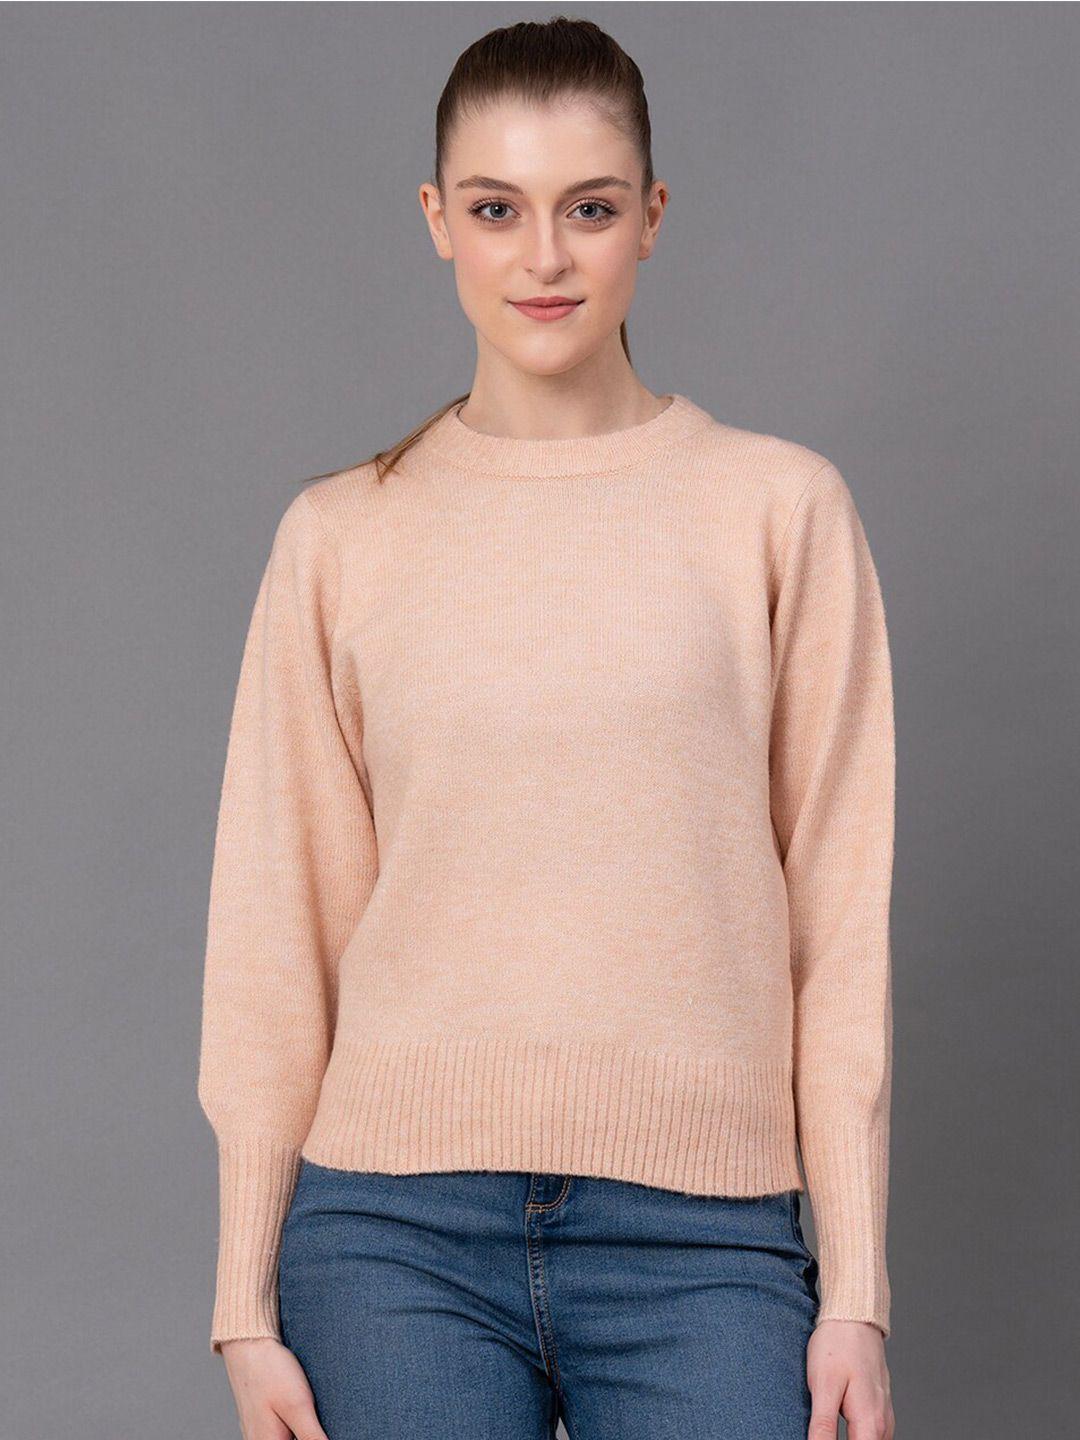 red tape round neck ribbed pullover